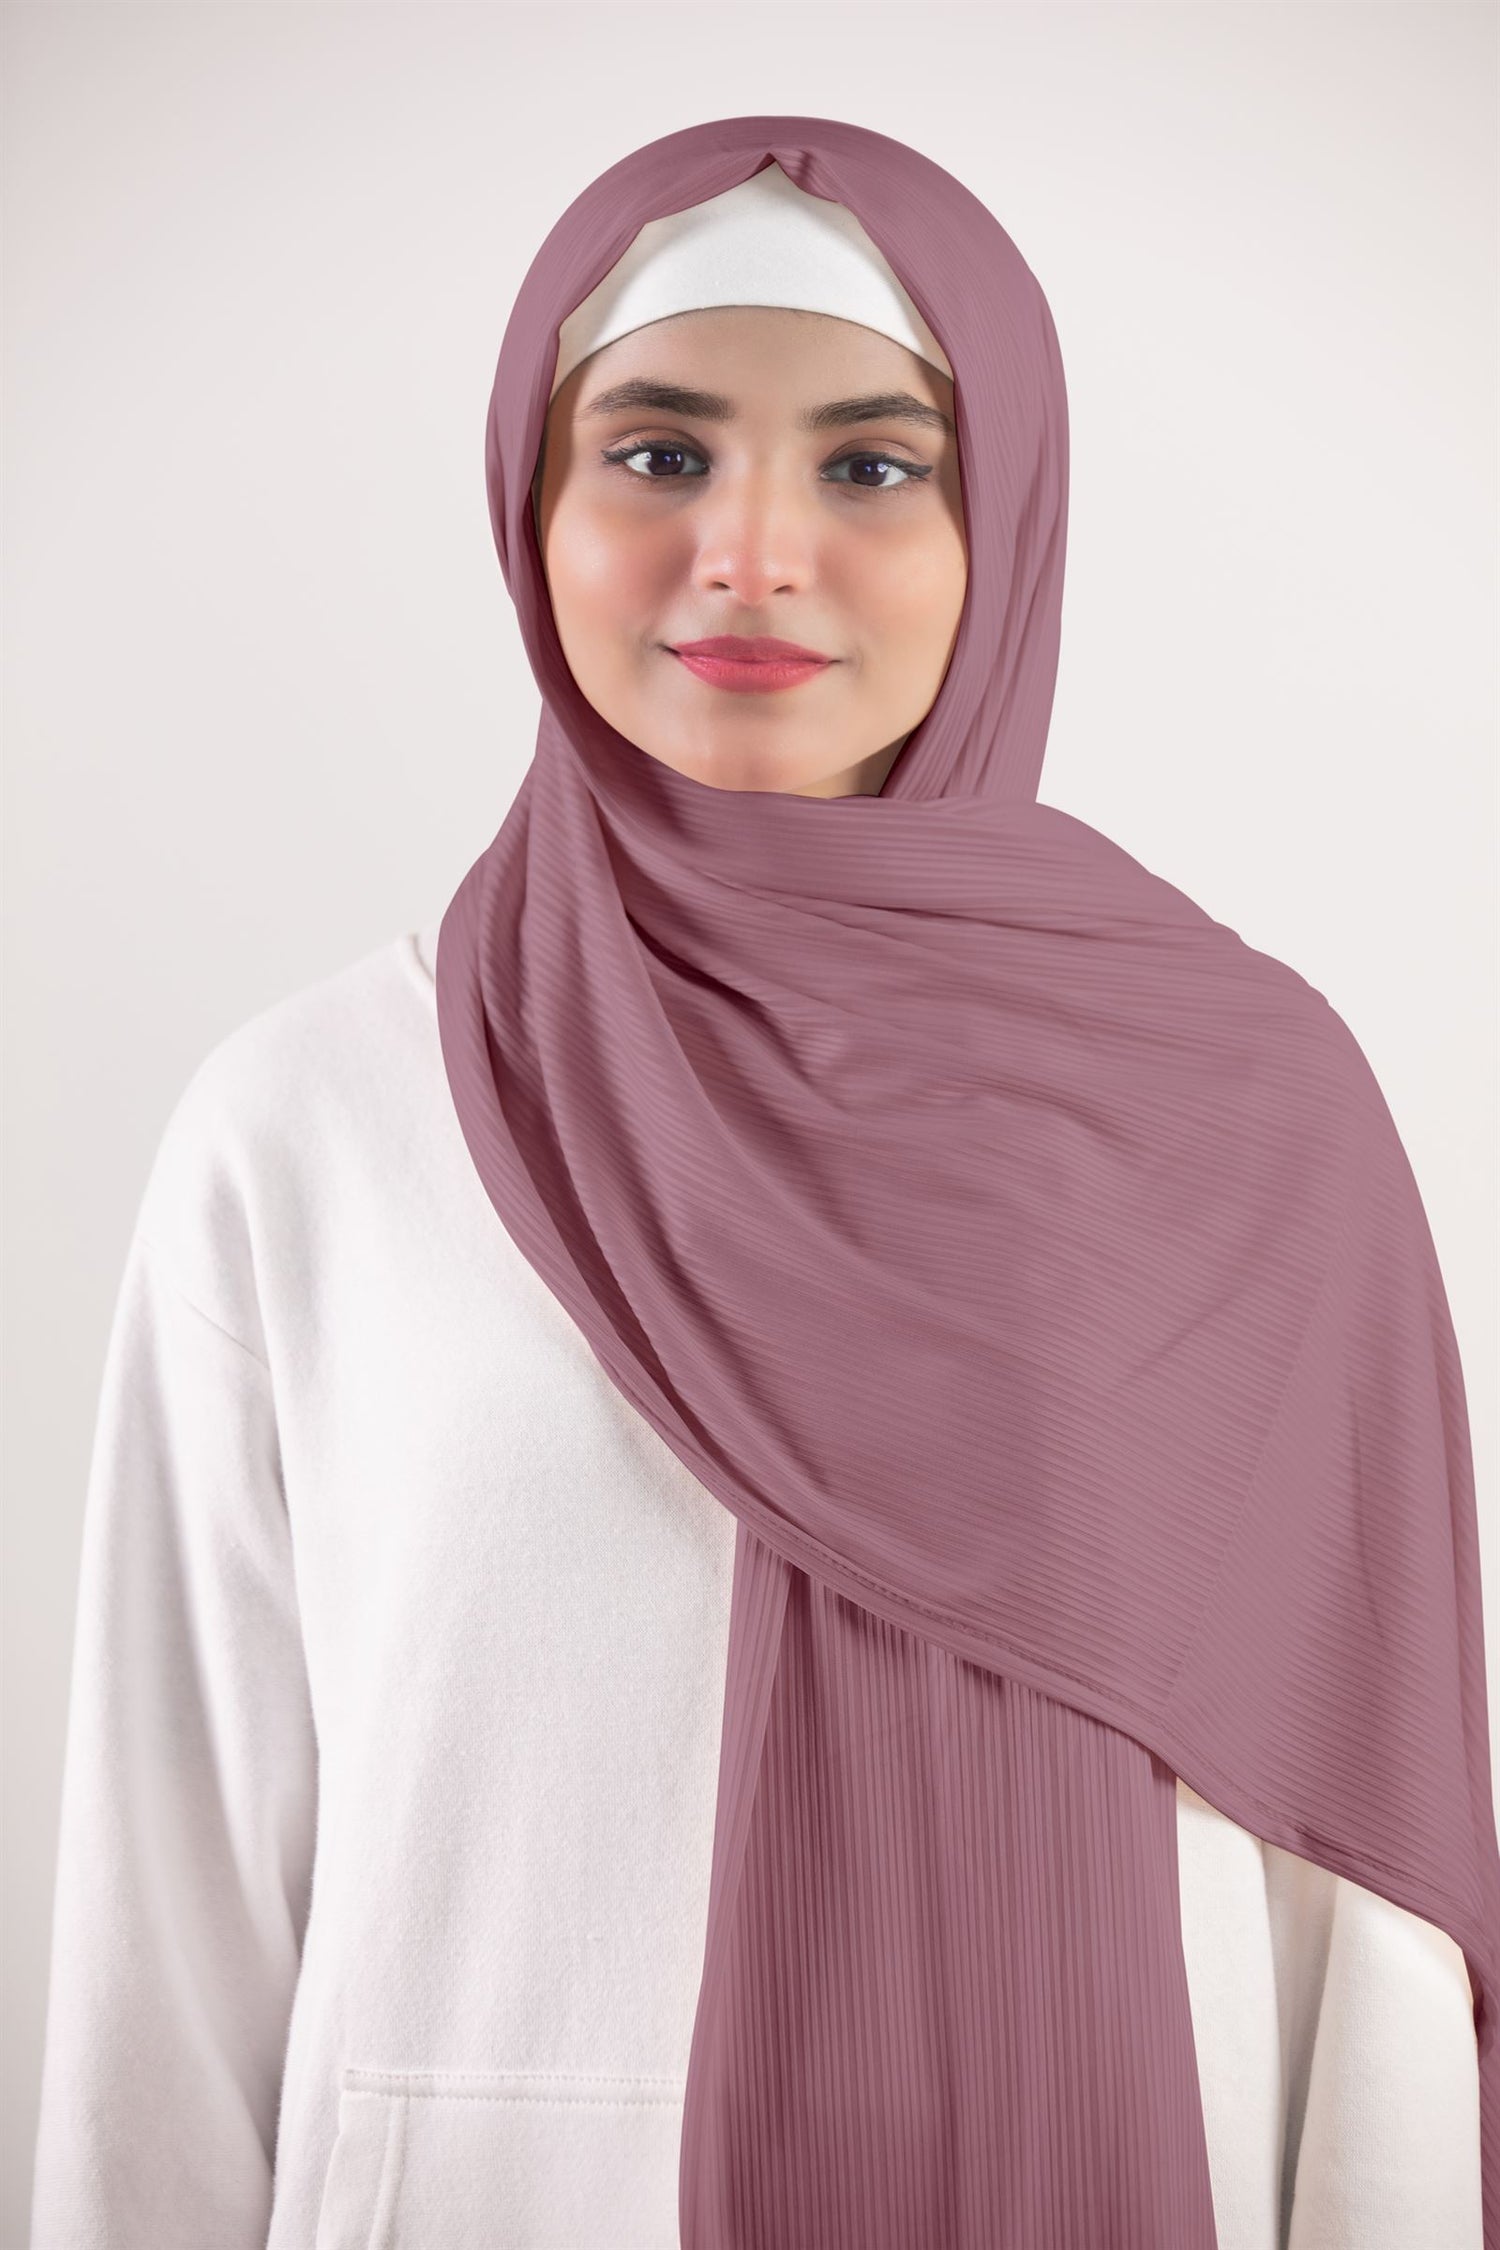 Ribbed Jersey Hijab in Nude Pink